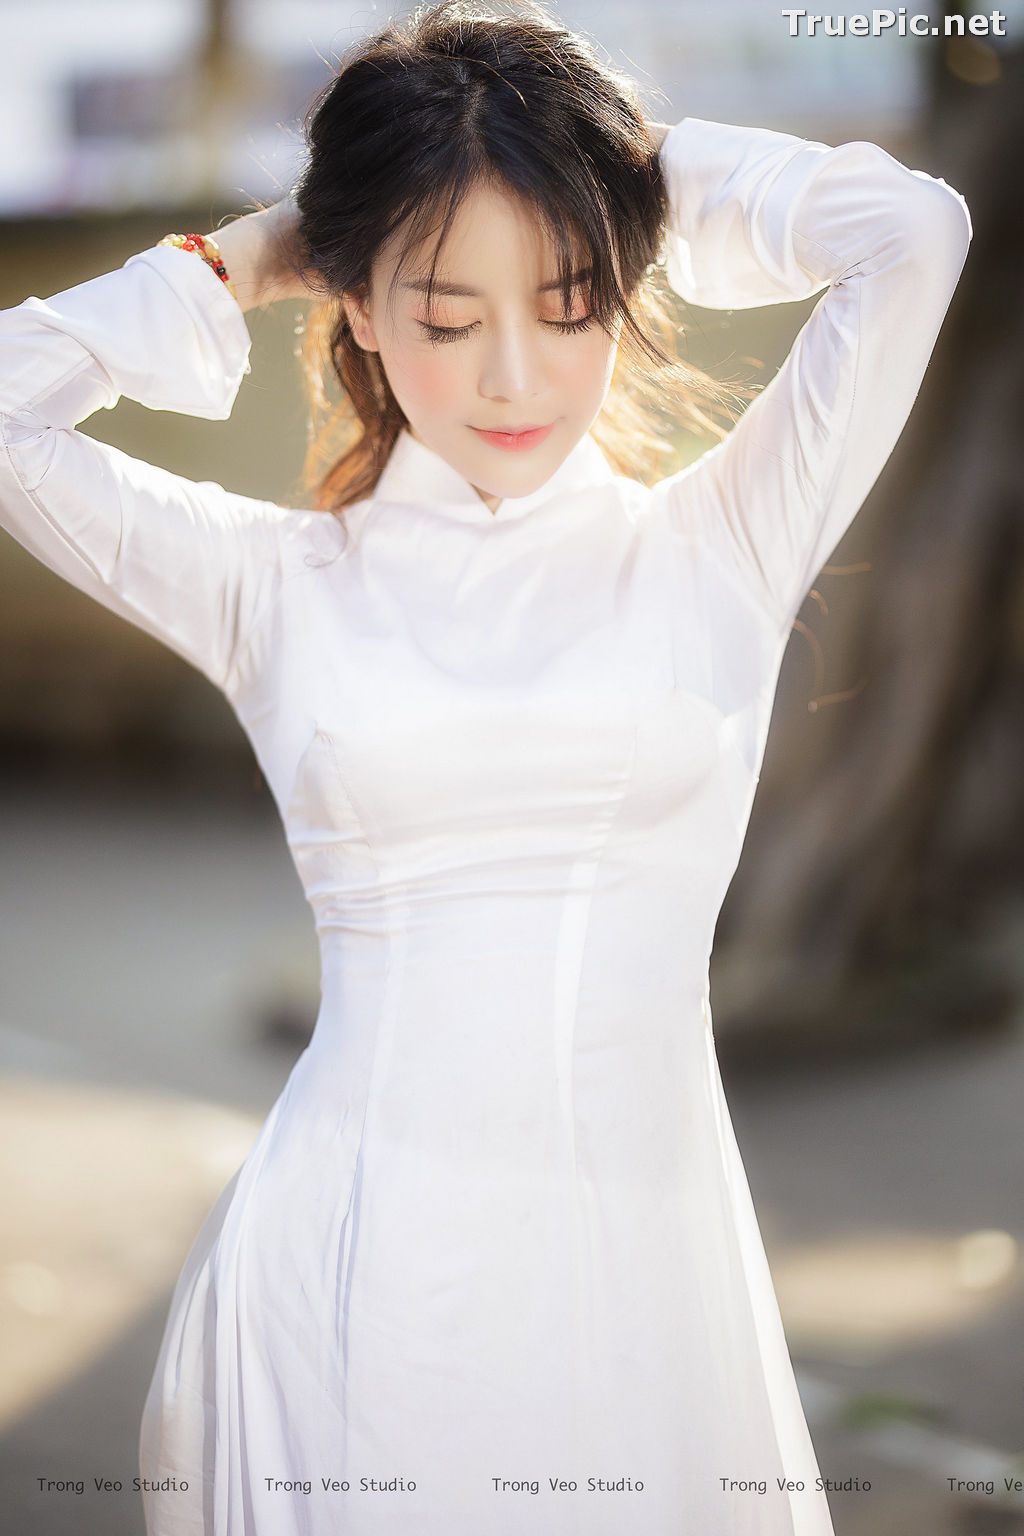 Image The Beauty of Vietnamese Girls with Traditional Dress (Ao Dai) #5 - TruePic.net - Picture-32